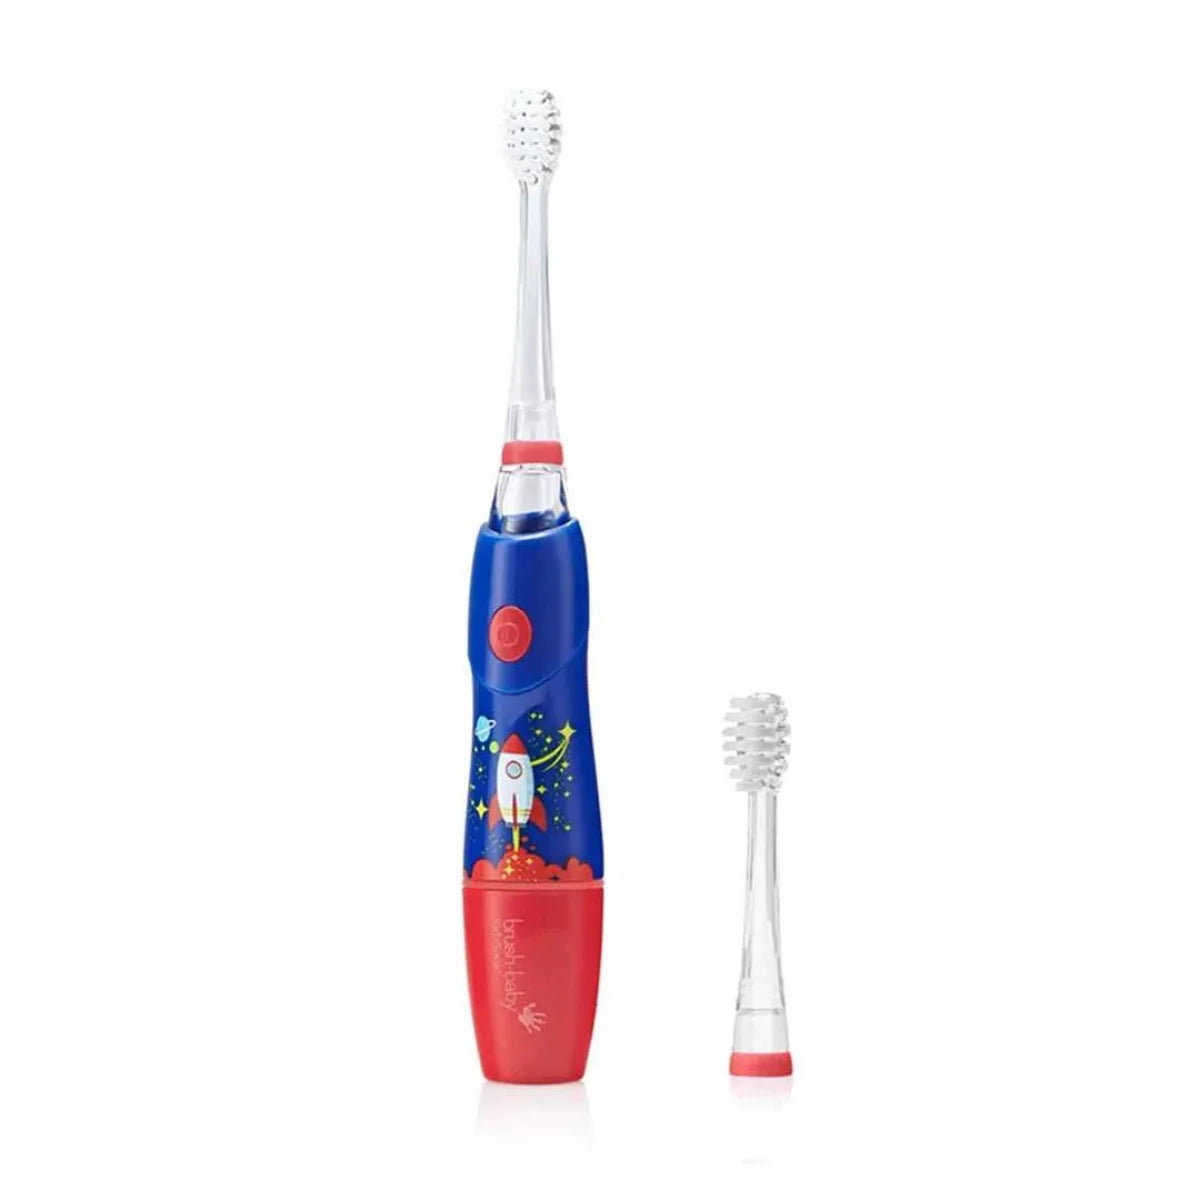 blue and red kidzsonic rocket kids sonic electric battery toothbrush